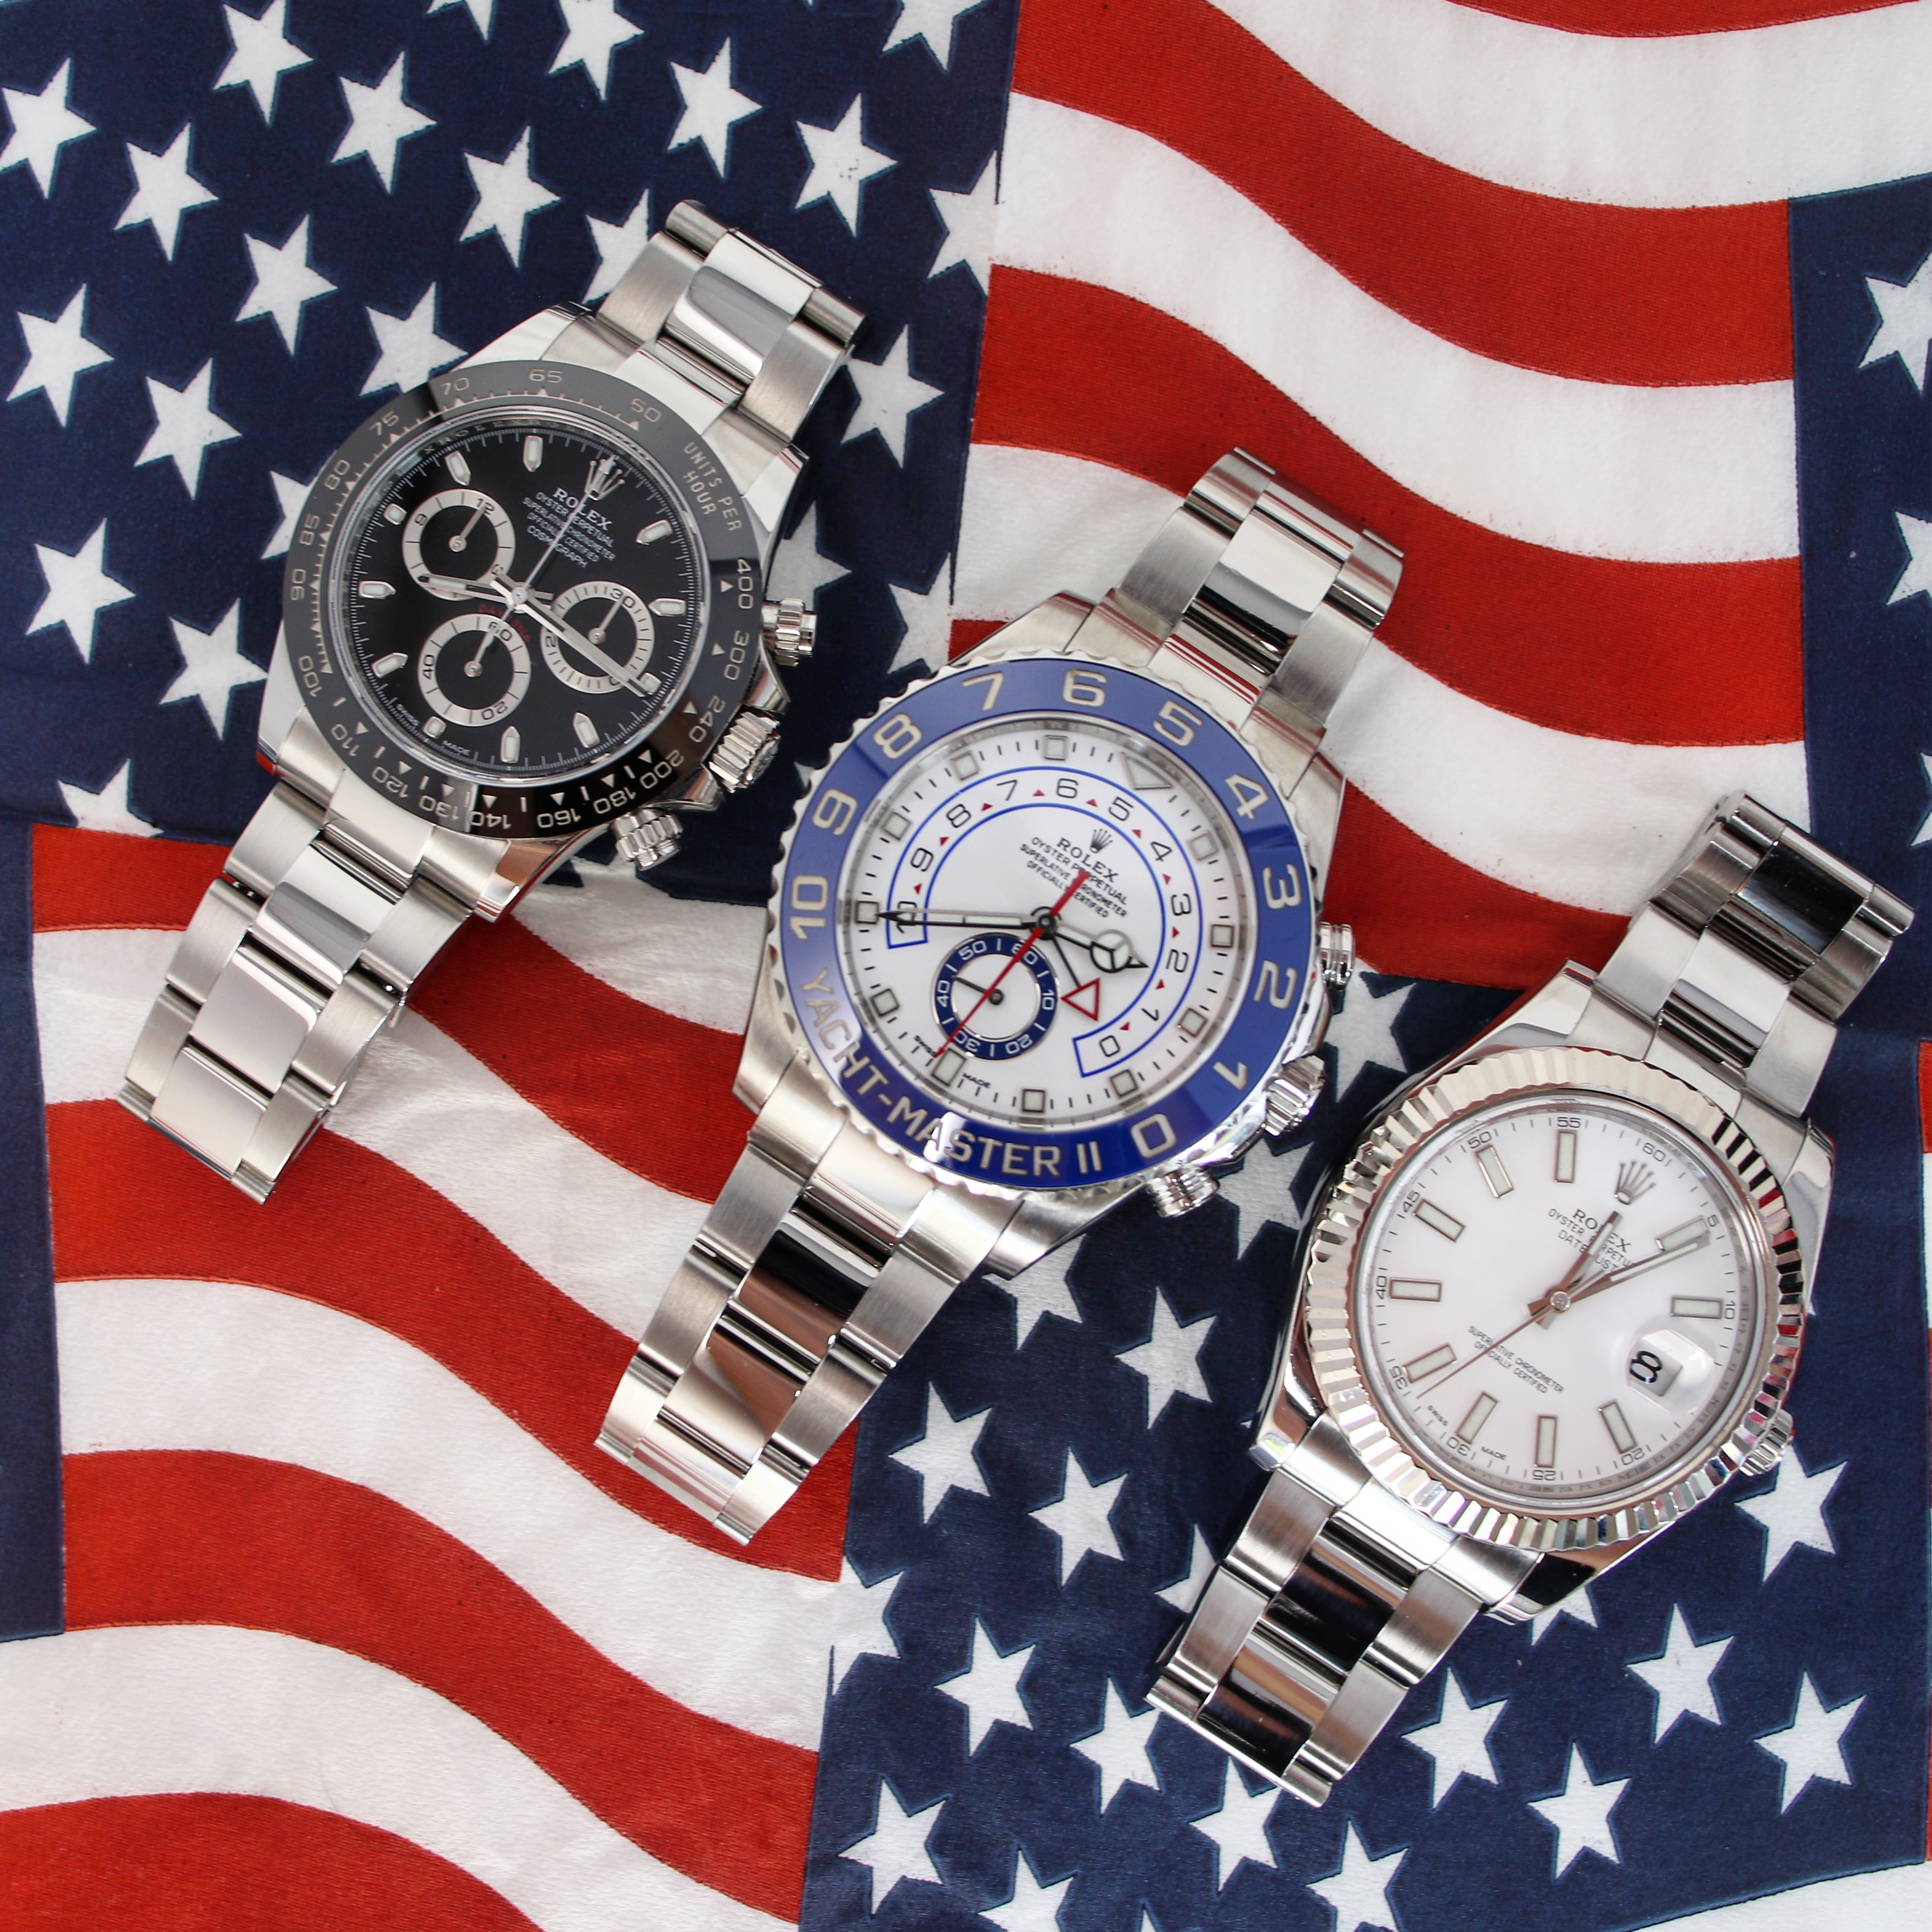 rolex straps options for three pictured watches Yachtmaster II daytona and datejust